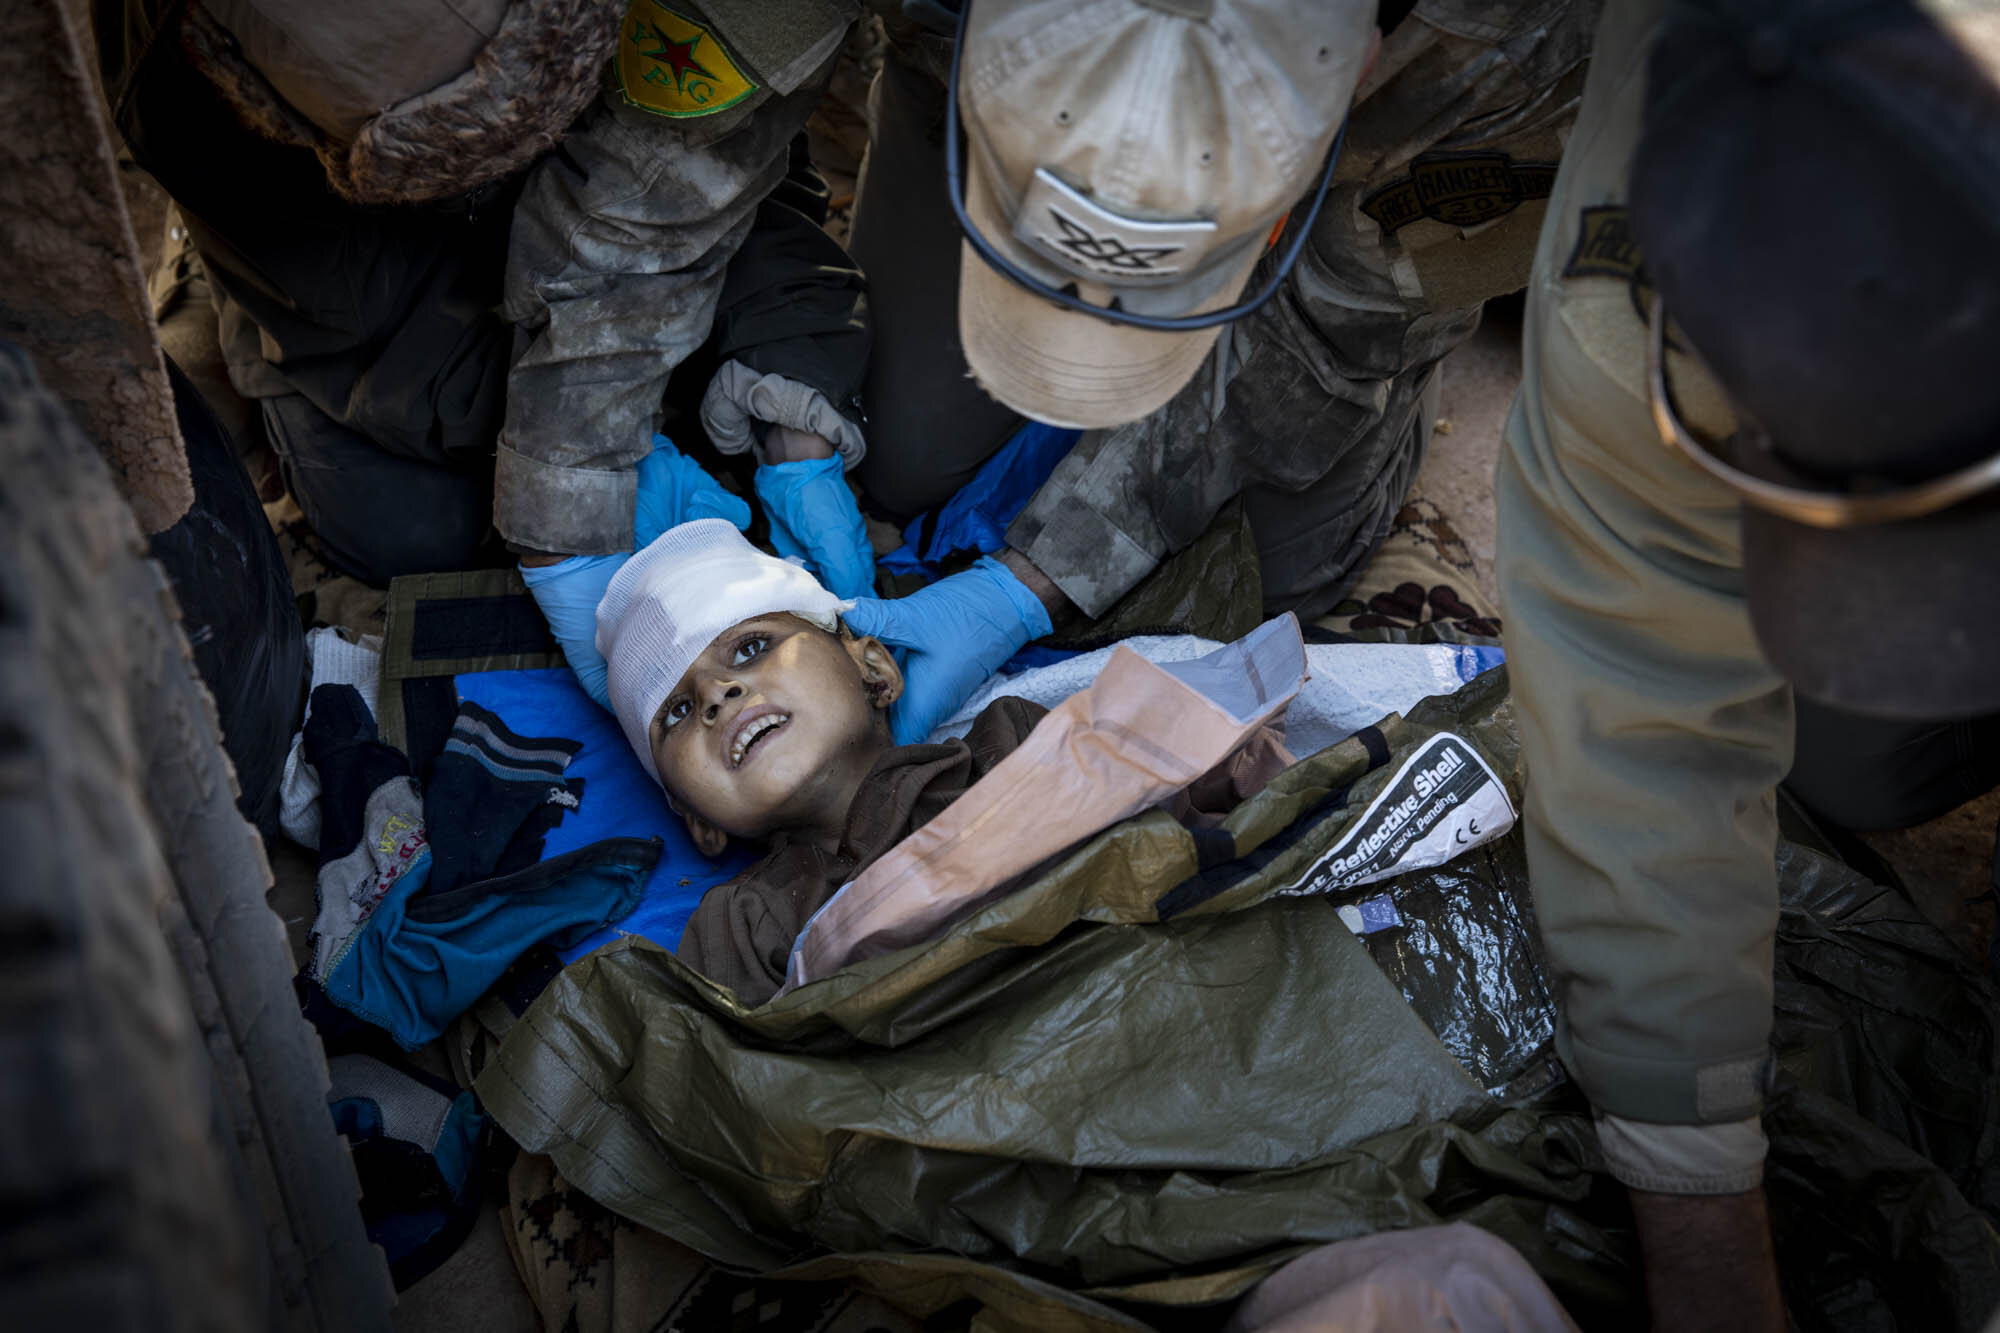  6-year-old Mohammed Ameri was treated for multiple injuries, by volunteer medics with the organisation known as the ‘Free Burma Rangers’, after his mother managed to get him out of the last ISIS-held village of Baghuz in Deir al-Zour, south east Syr